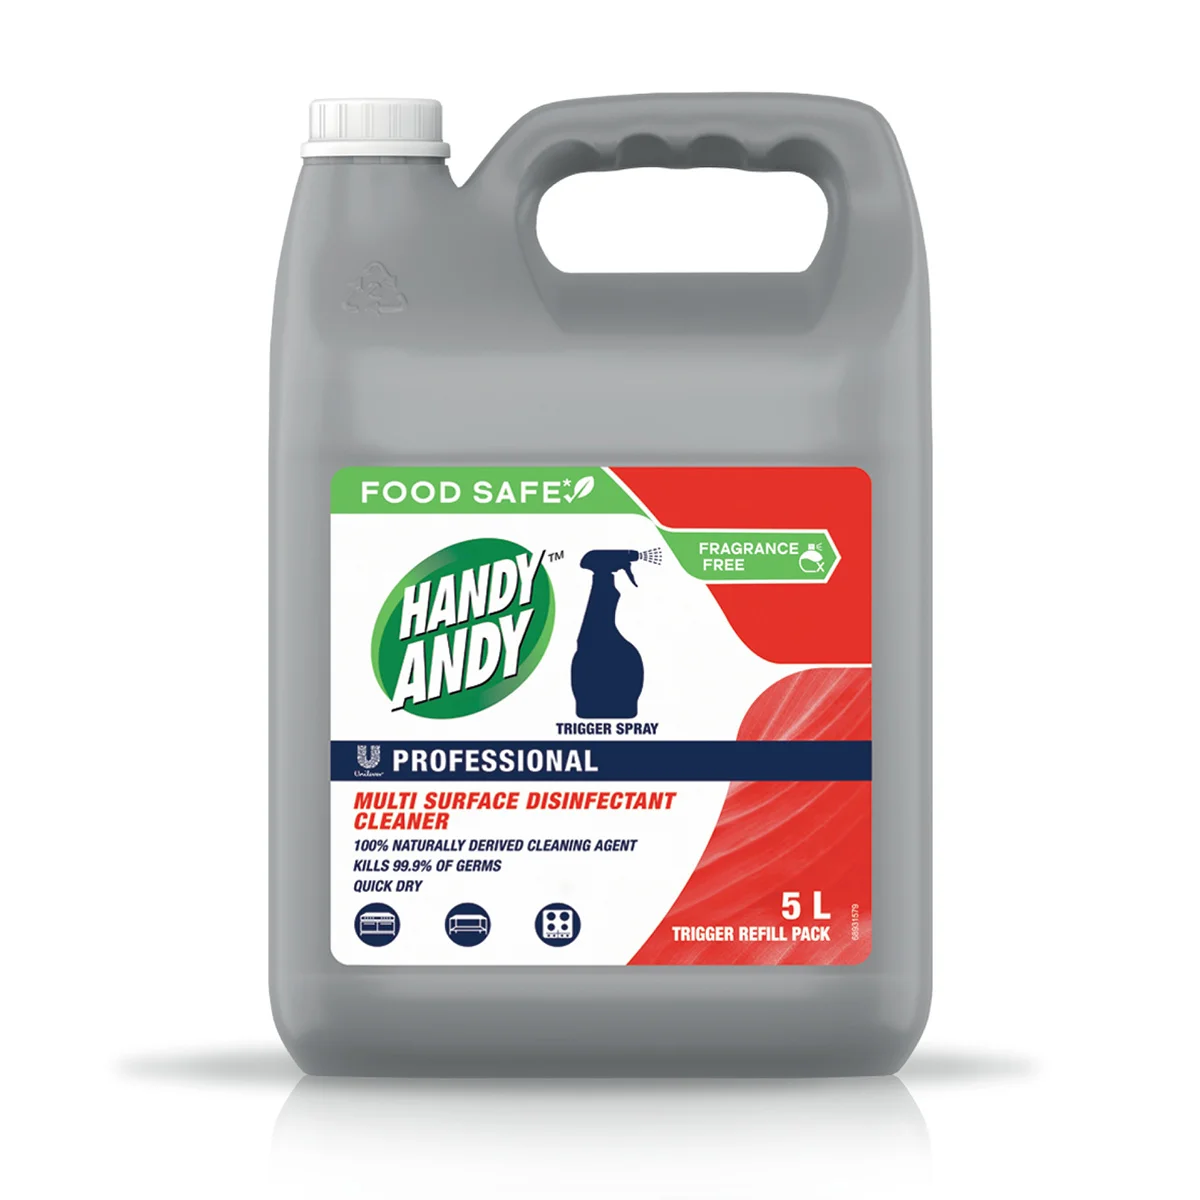 Handy Andy Professional Multi Surface Disinfectant Cleaner